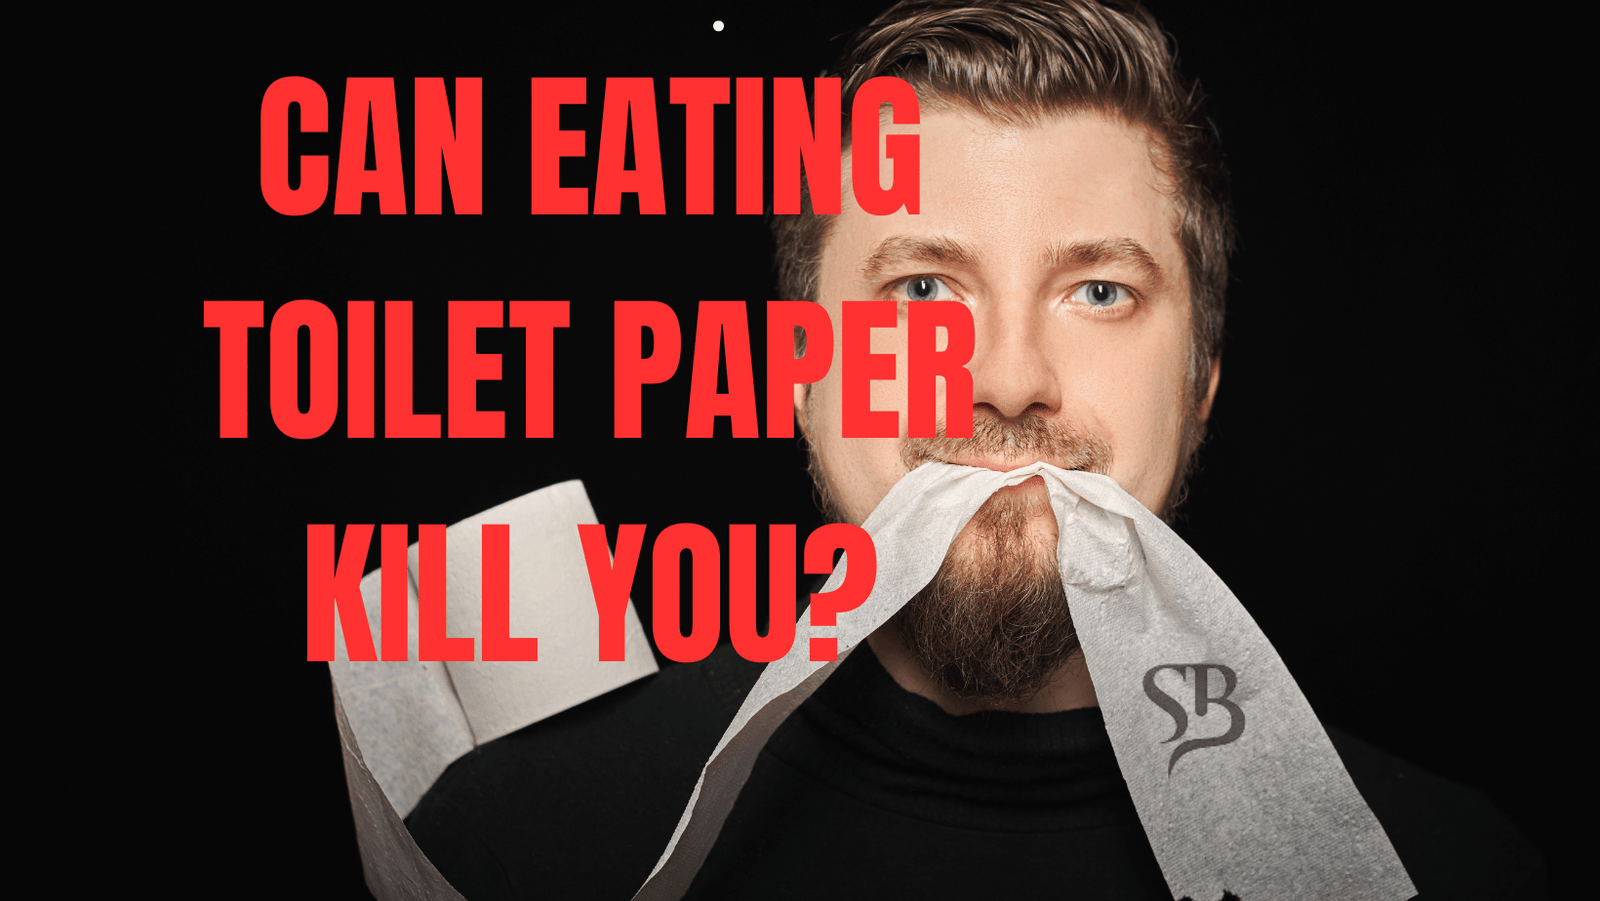 A Man is eating toilet paper